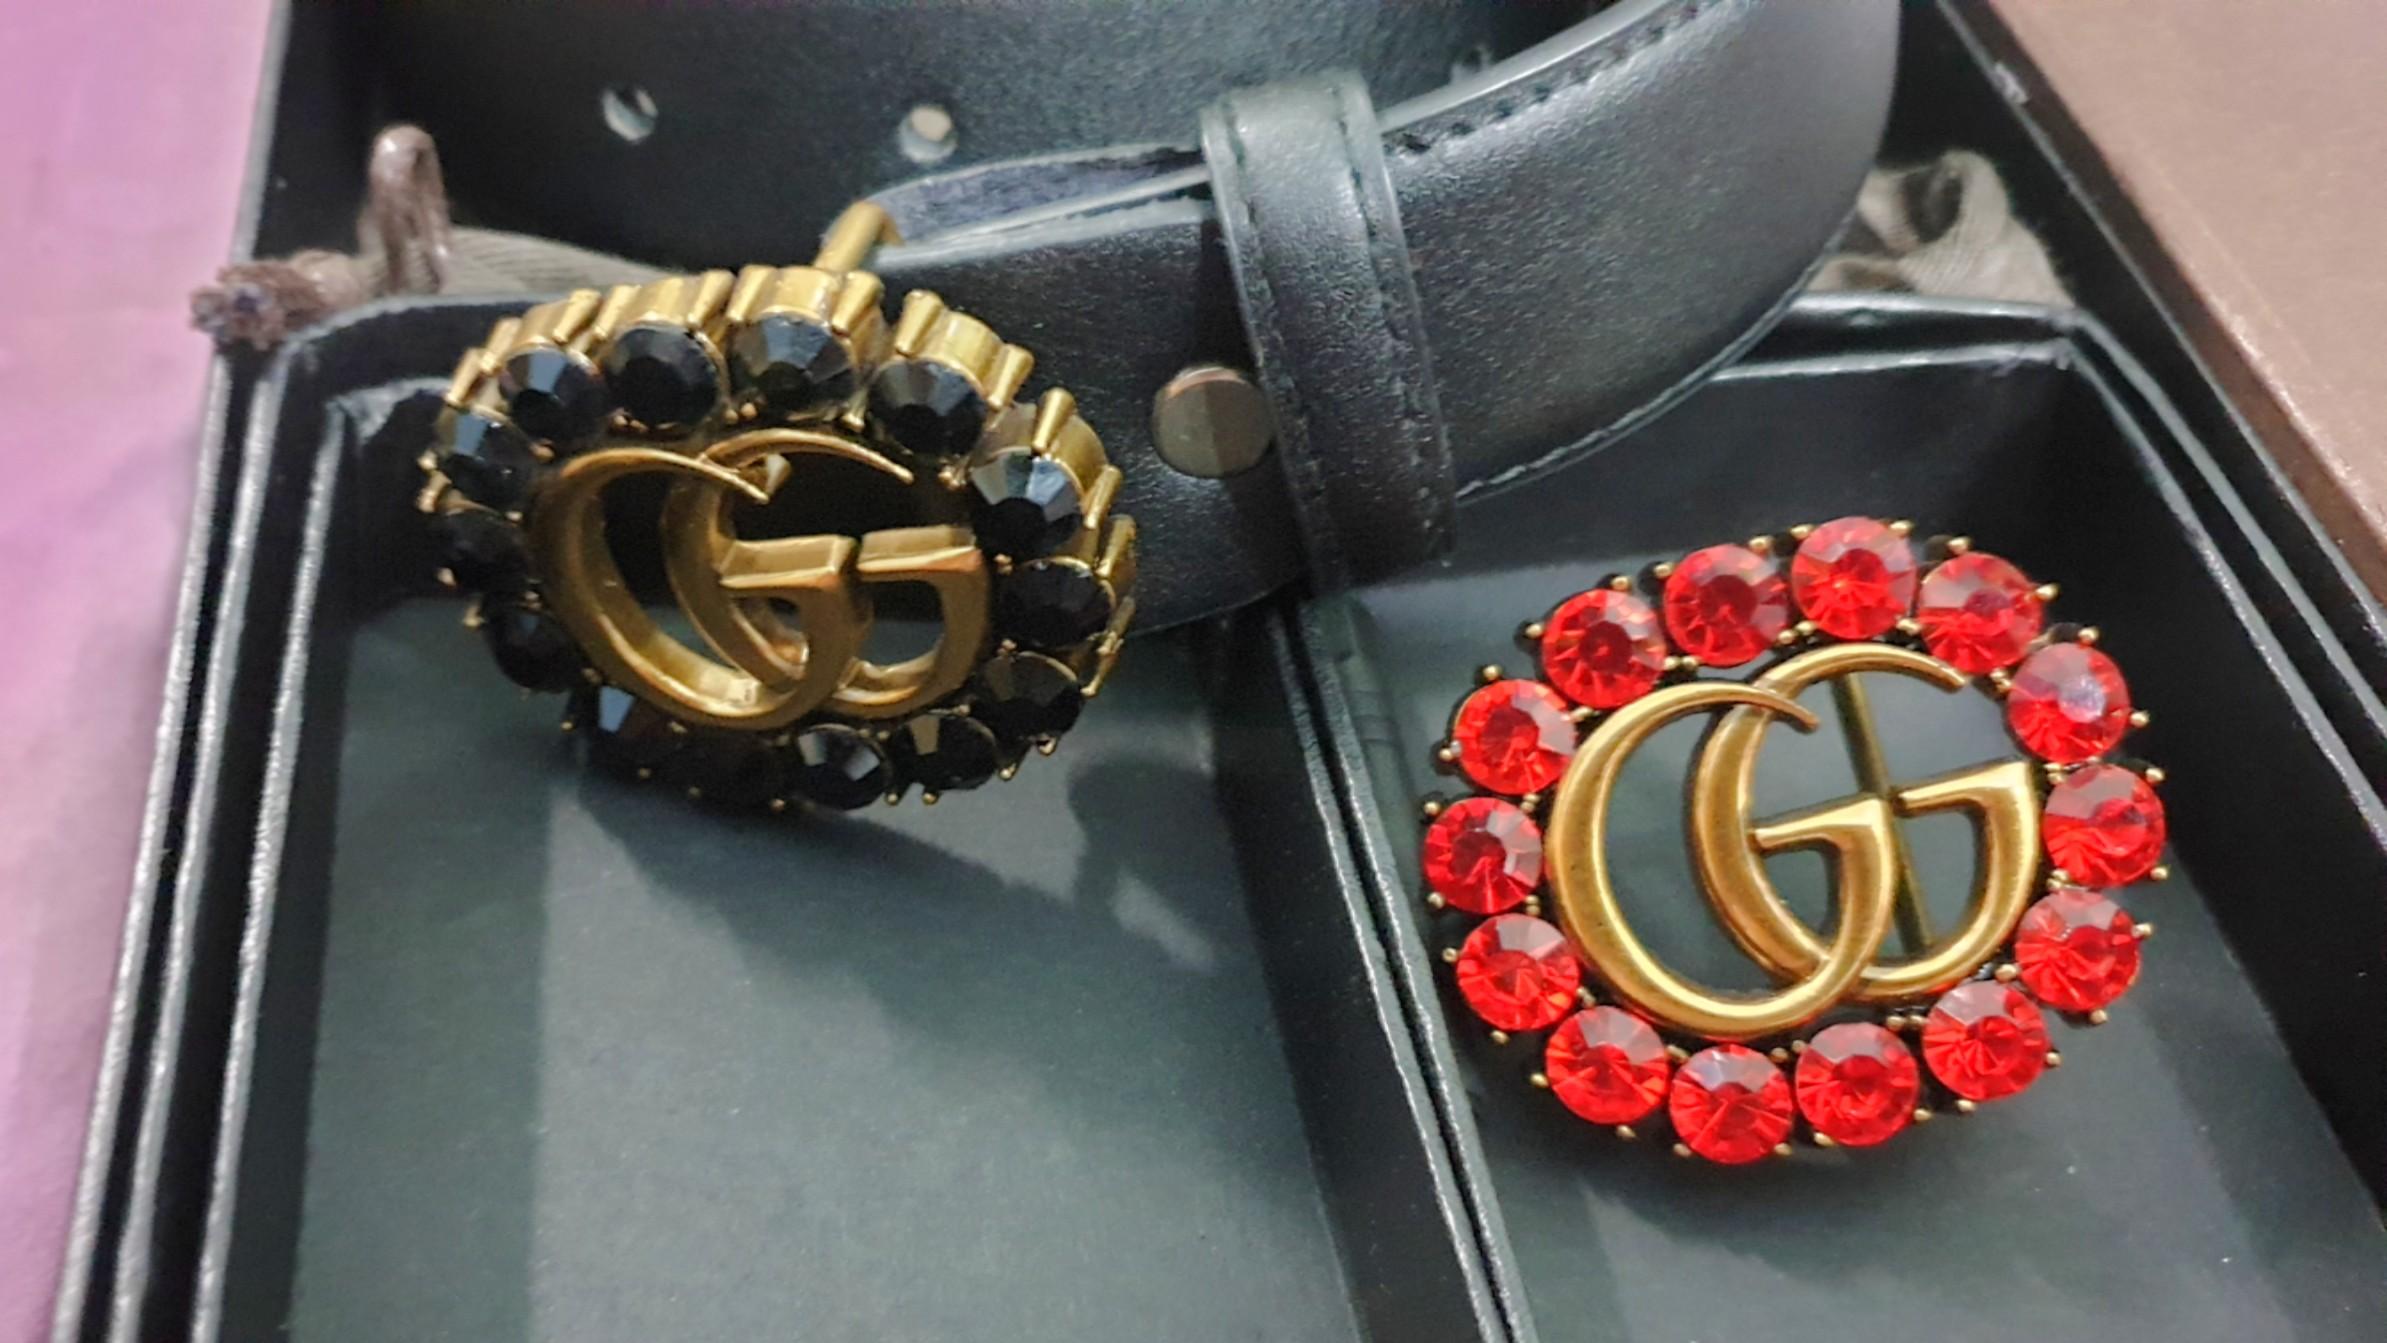 gucci belt with crystals